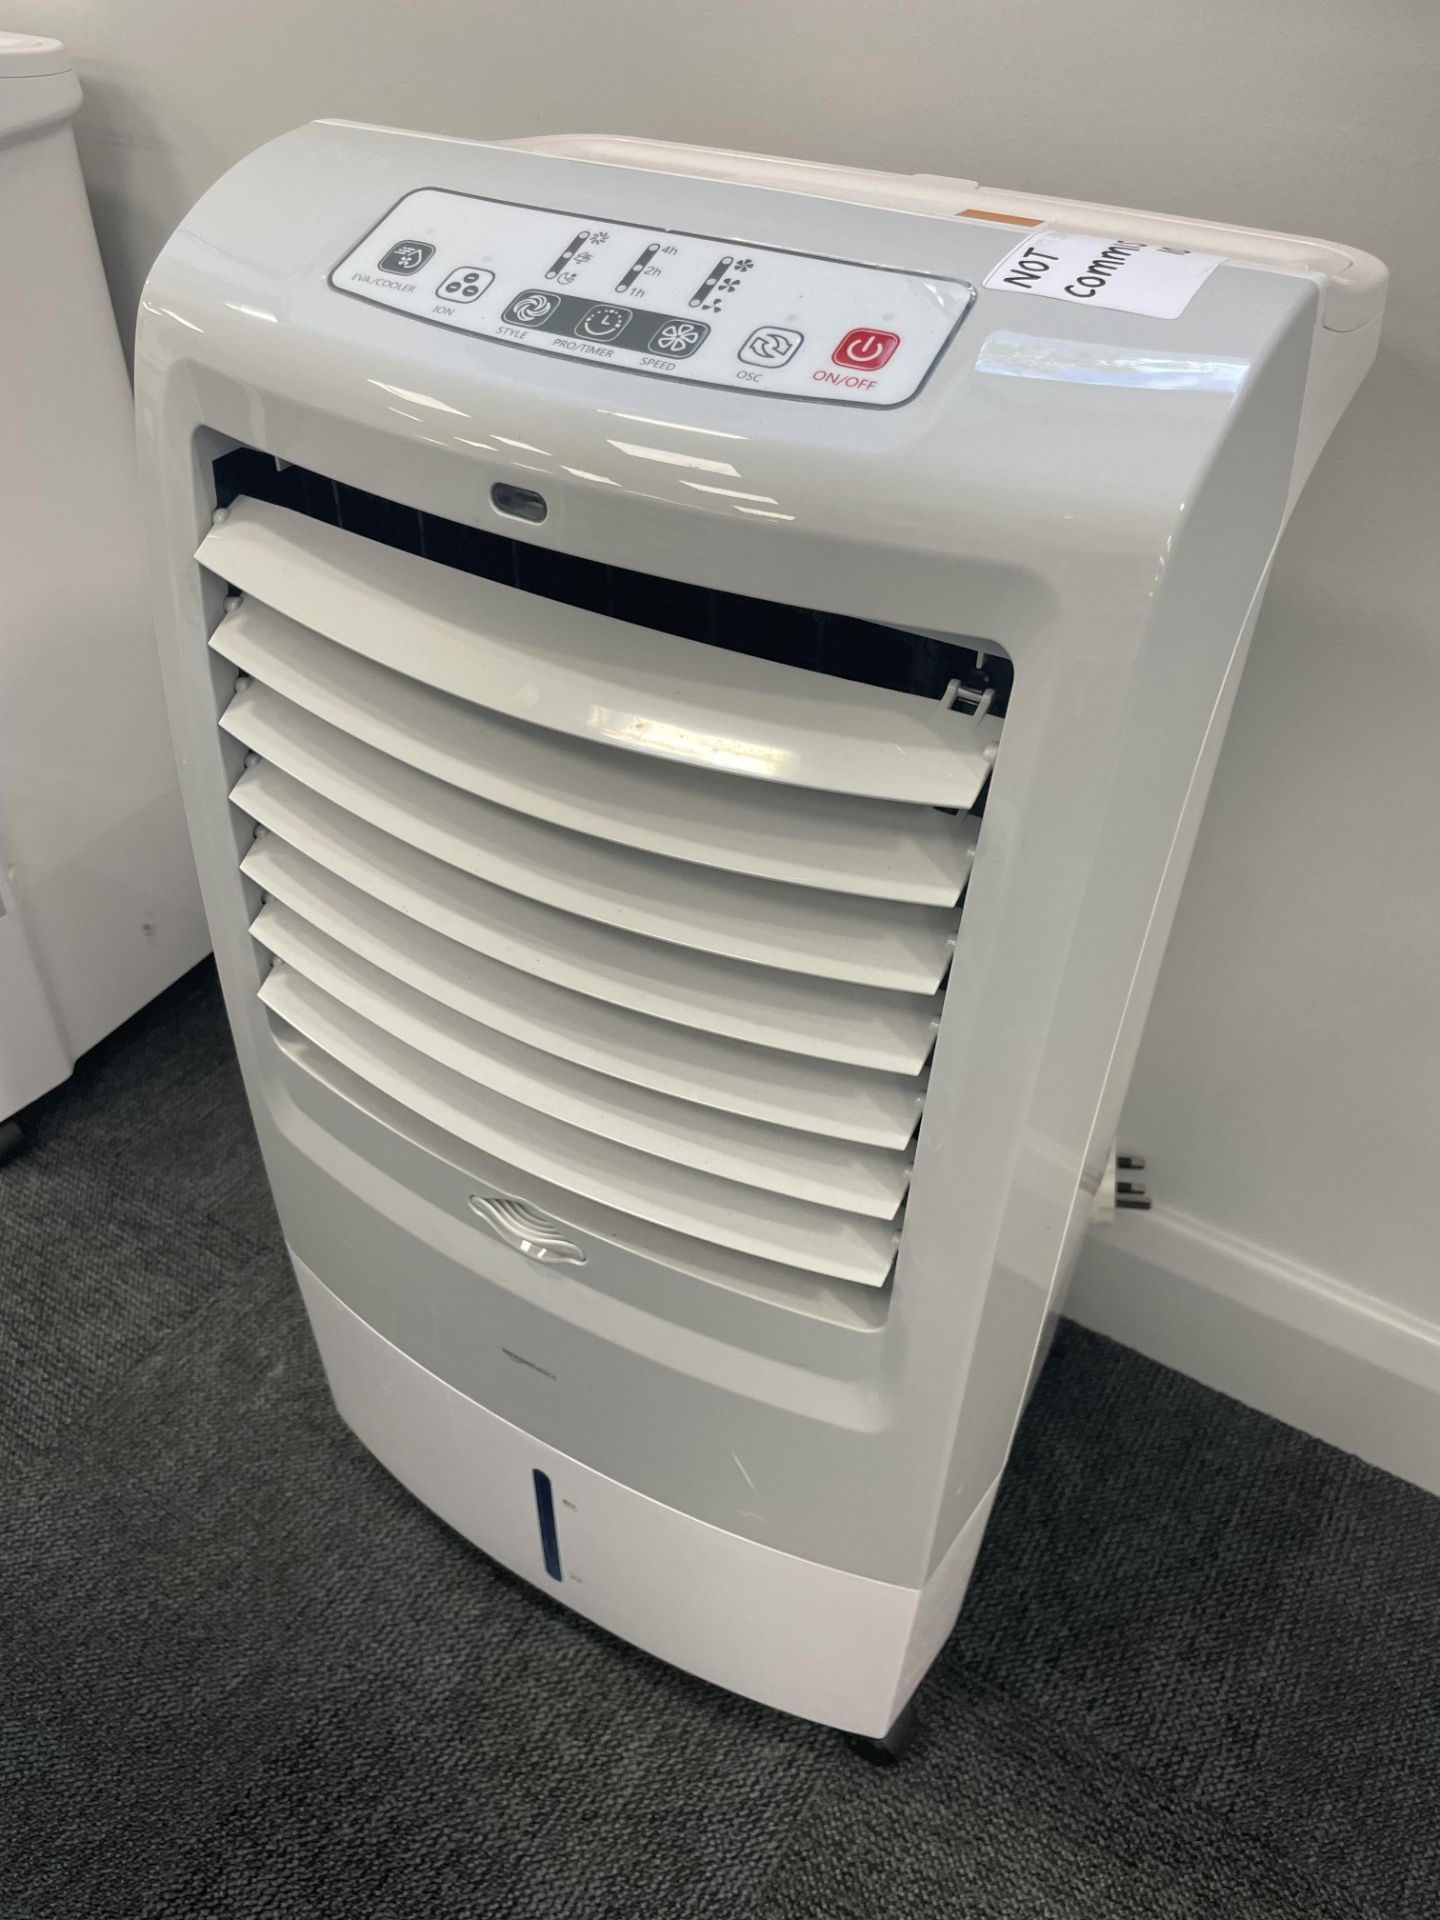 An Amazon Basics AC120-15F mobile osculating 3 in 1 air cooler.